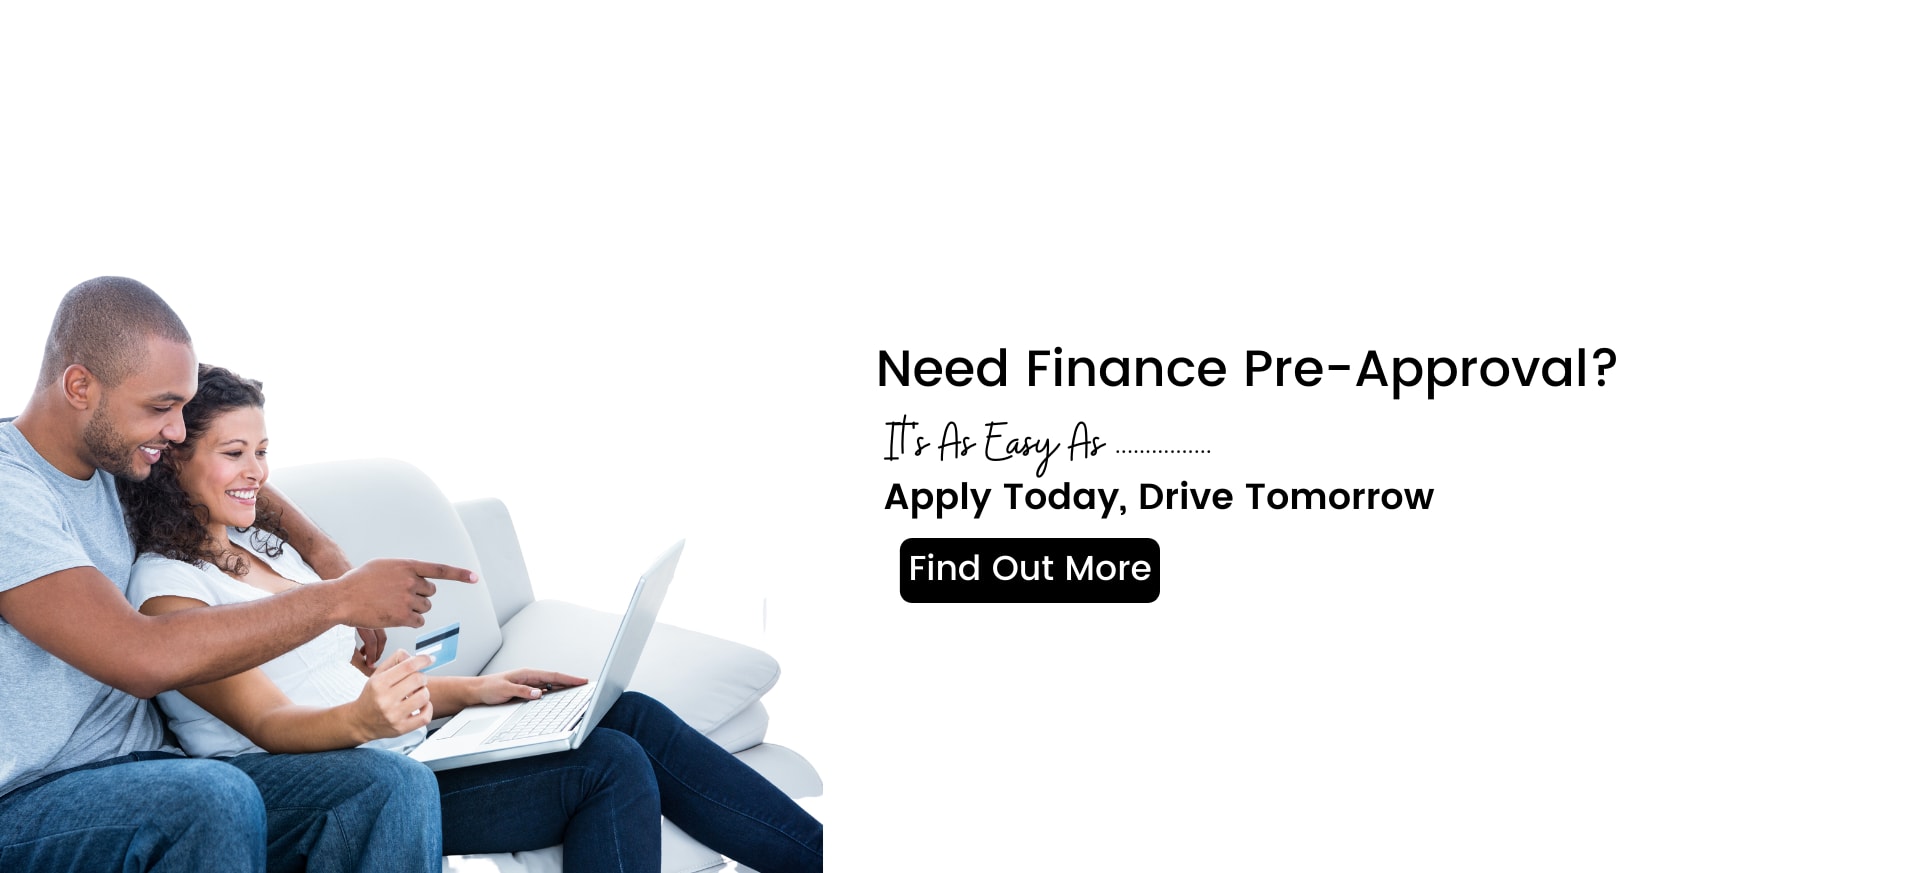 Need Finance Pre-Approval? It's As Easy As.......Apply Today, Drive Tomorrow | Find Out More